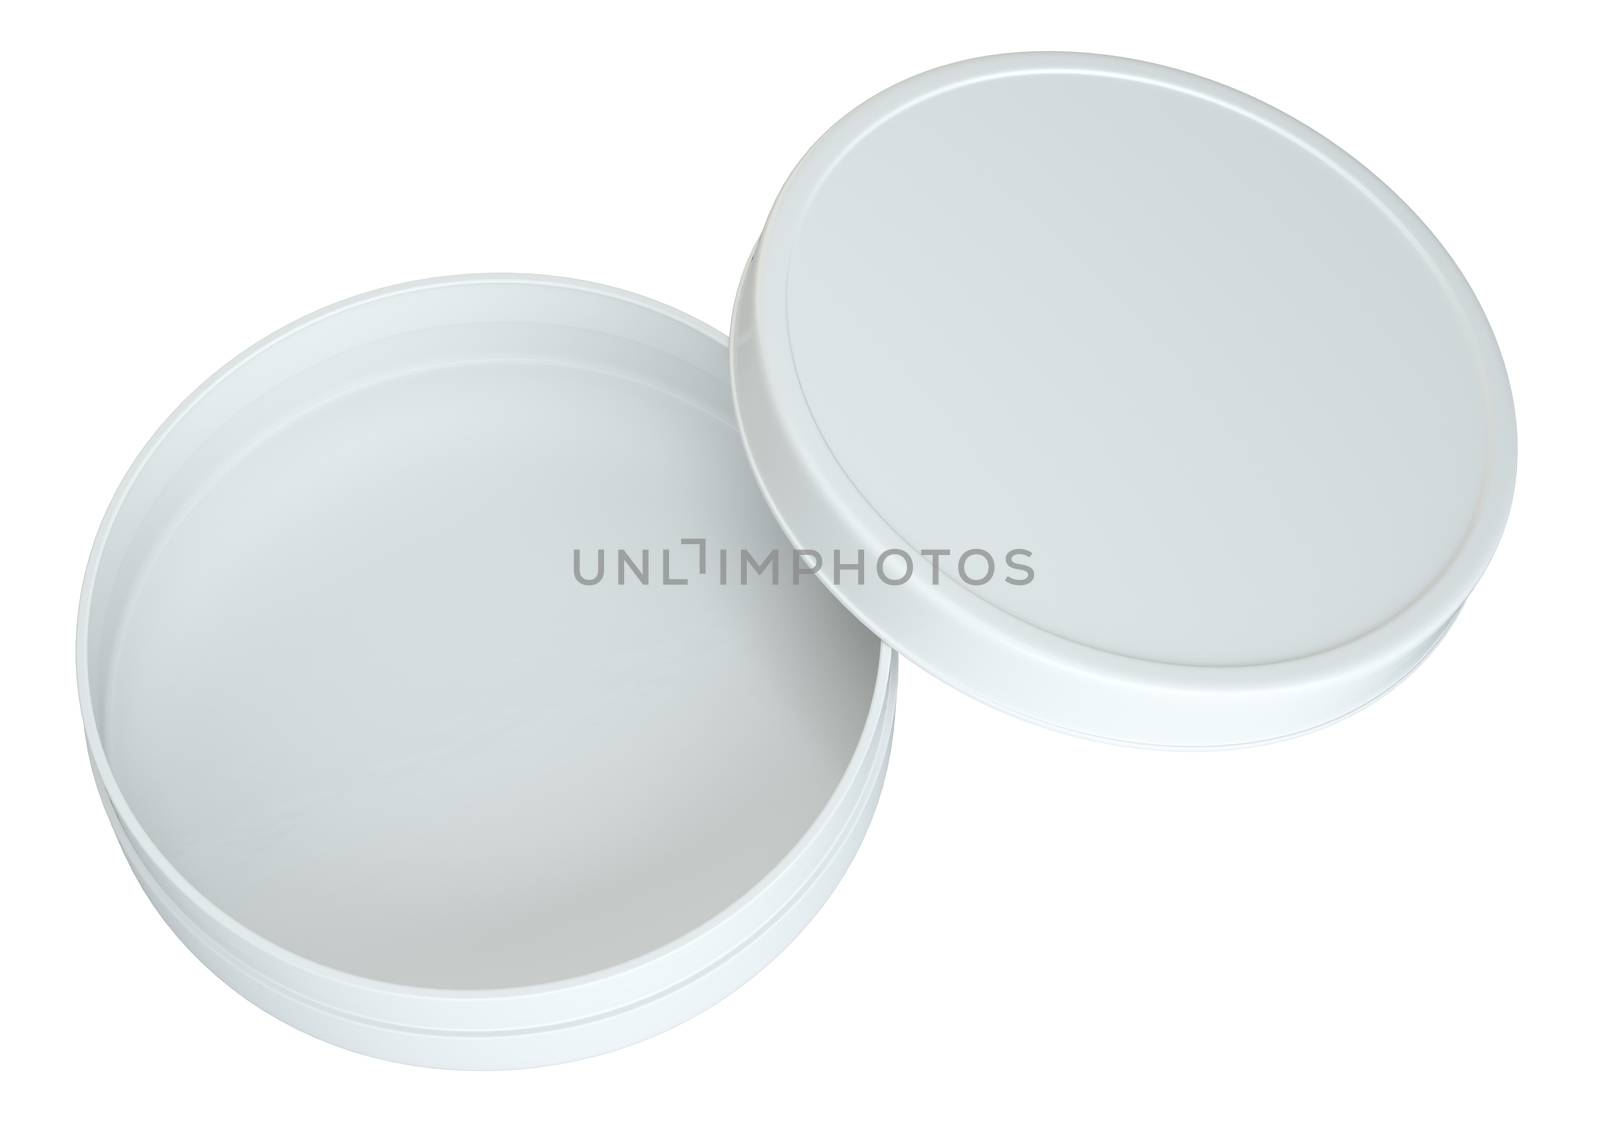 Product Packing. Top View. Cream White Opened Empty Can. Isolated On White Background. For Your Design. 3D Illustration